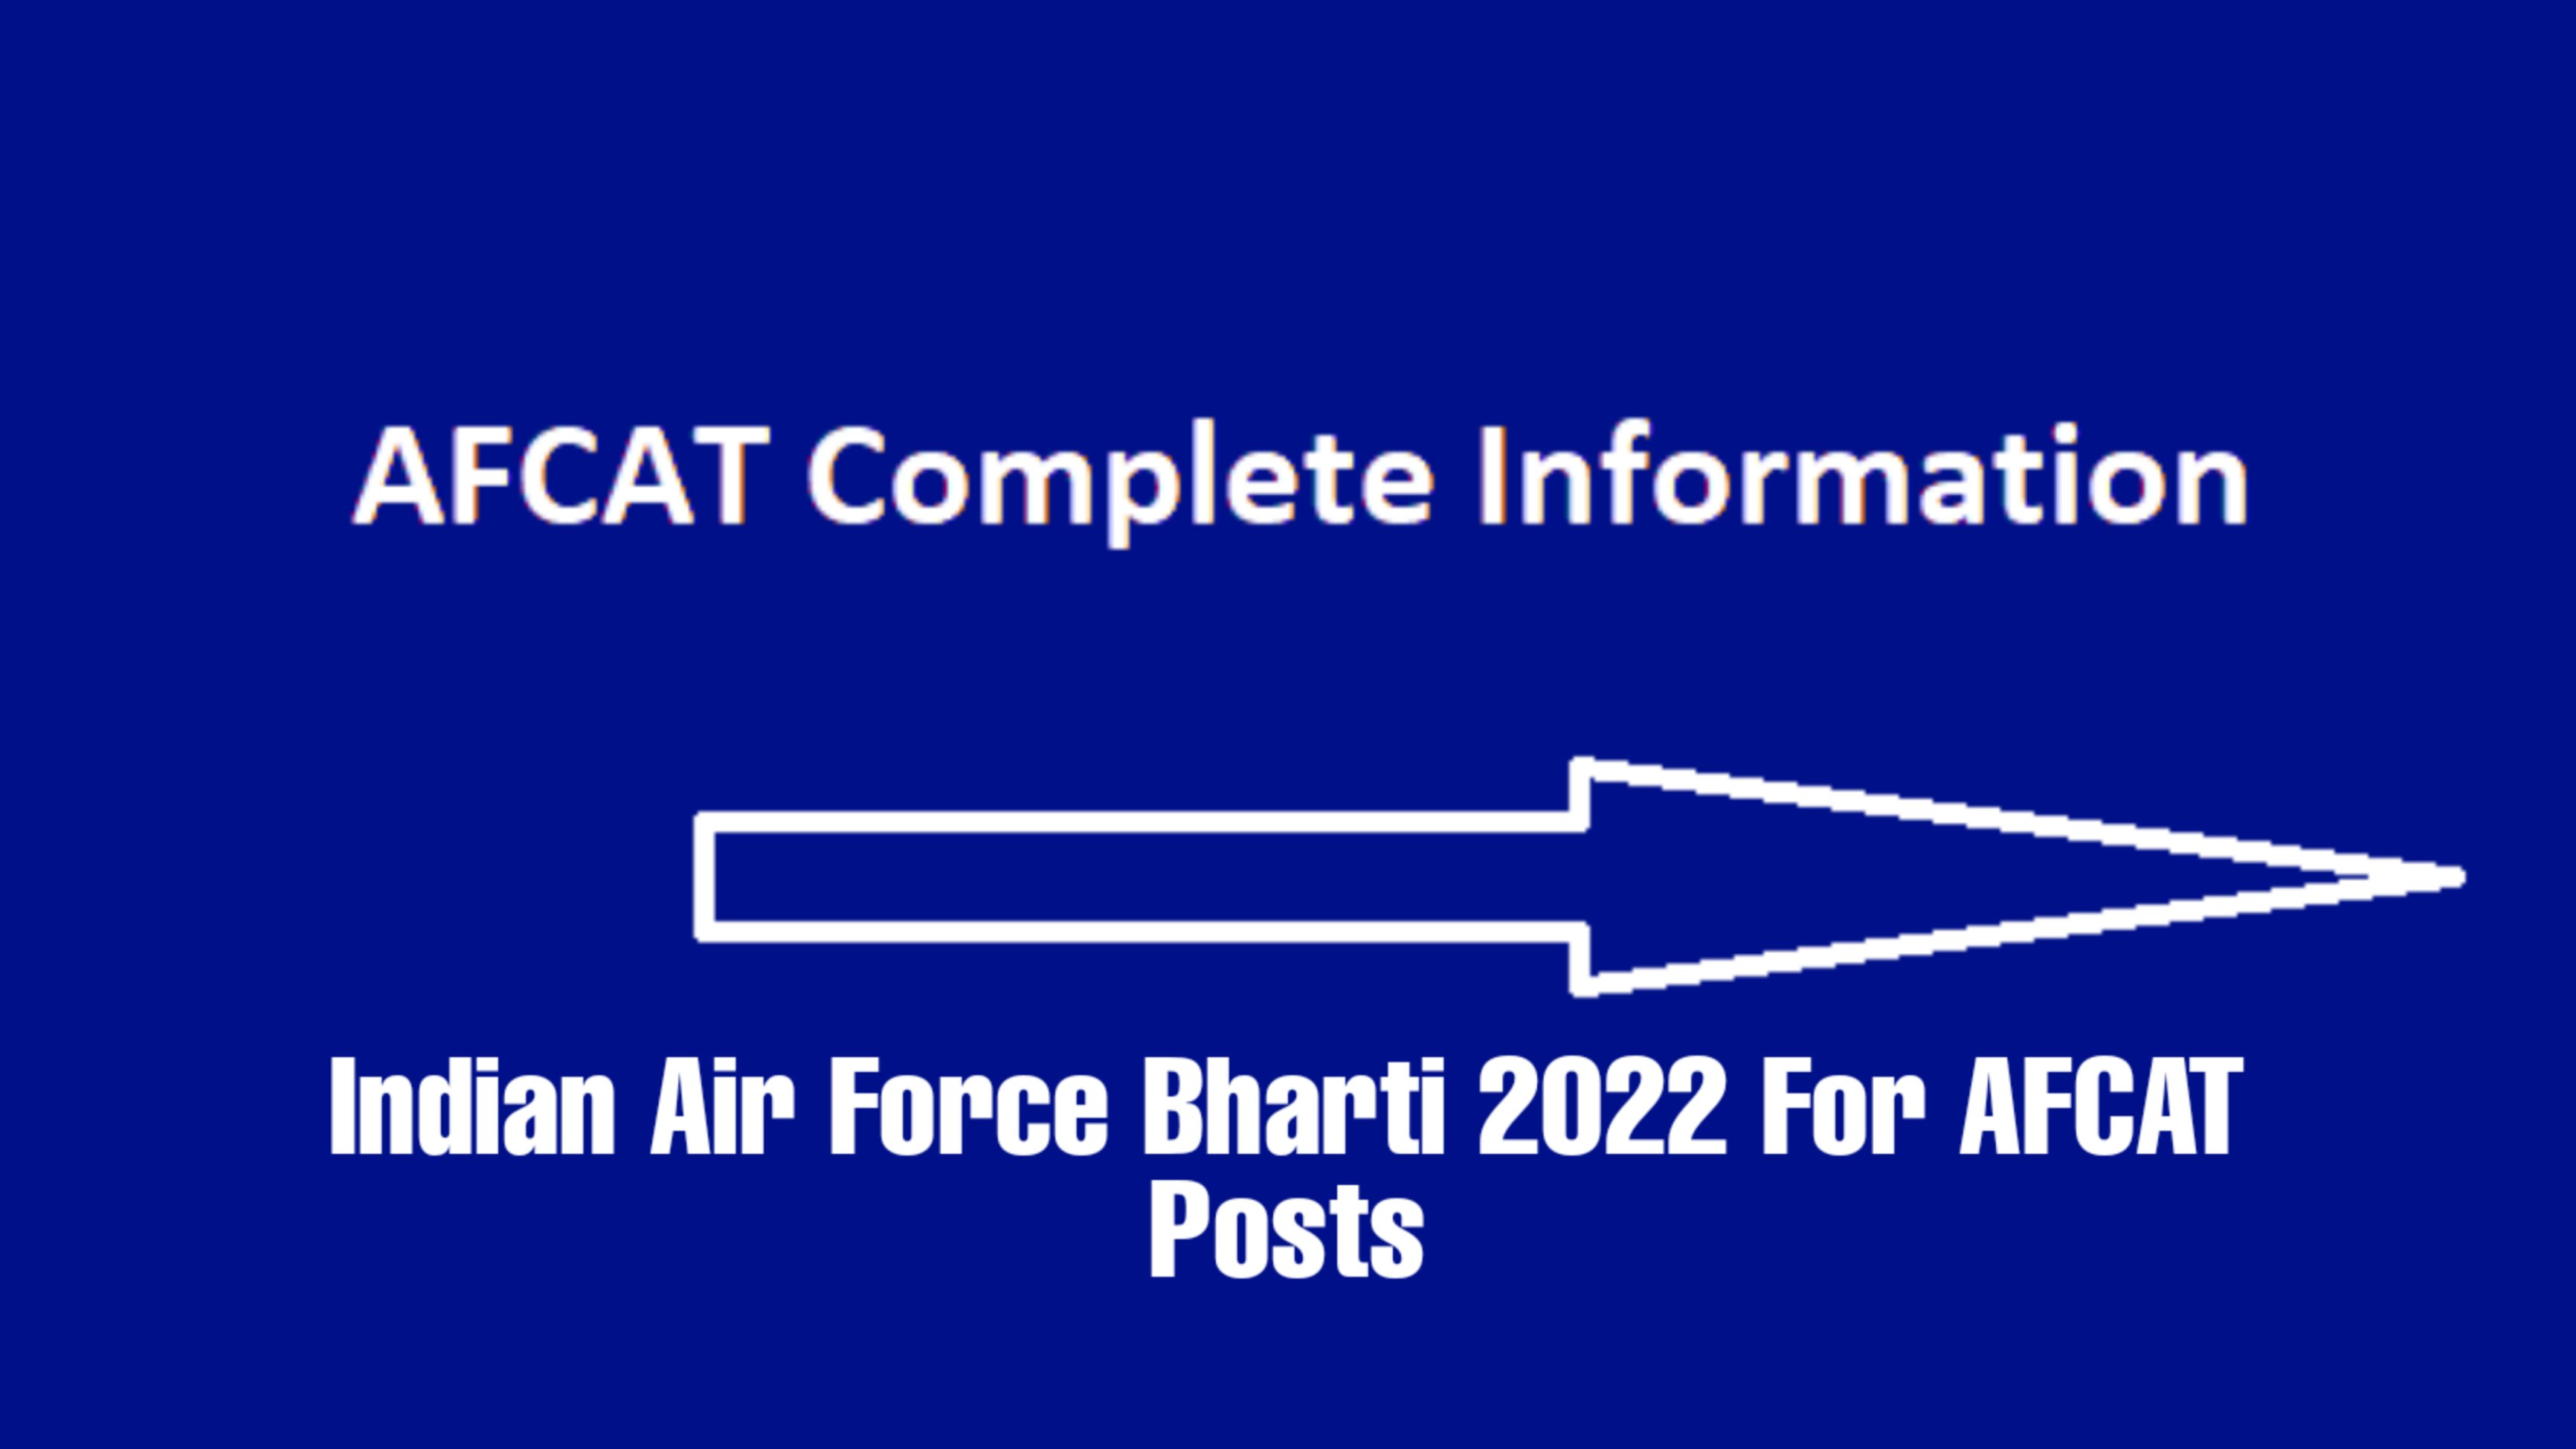 air force vacancy 2022 x y group Indian Air Force Recruitment 2022 Notification PDF Indian Air Force Recruitment 2022 qualification Air Force Y Group Vacancy 2022 Indian Air Force calendar 2022 Join Indian Air Force